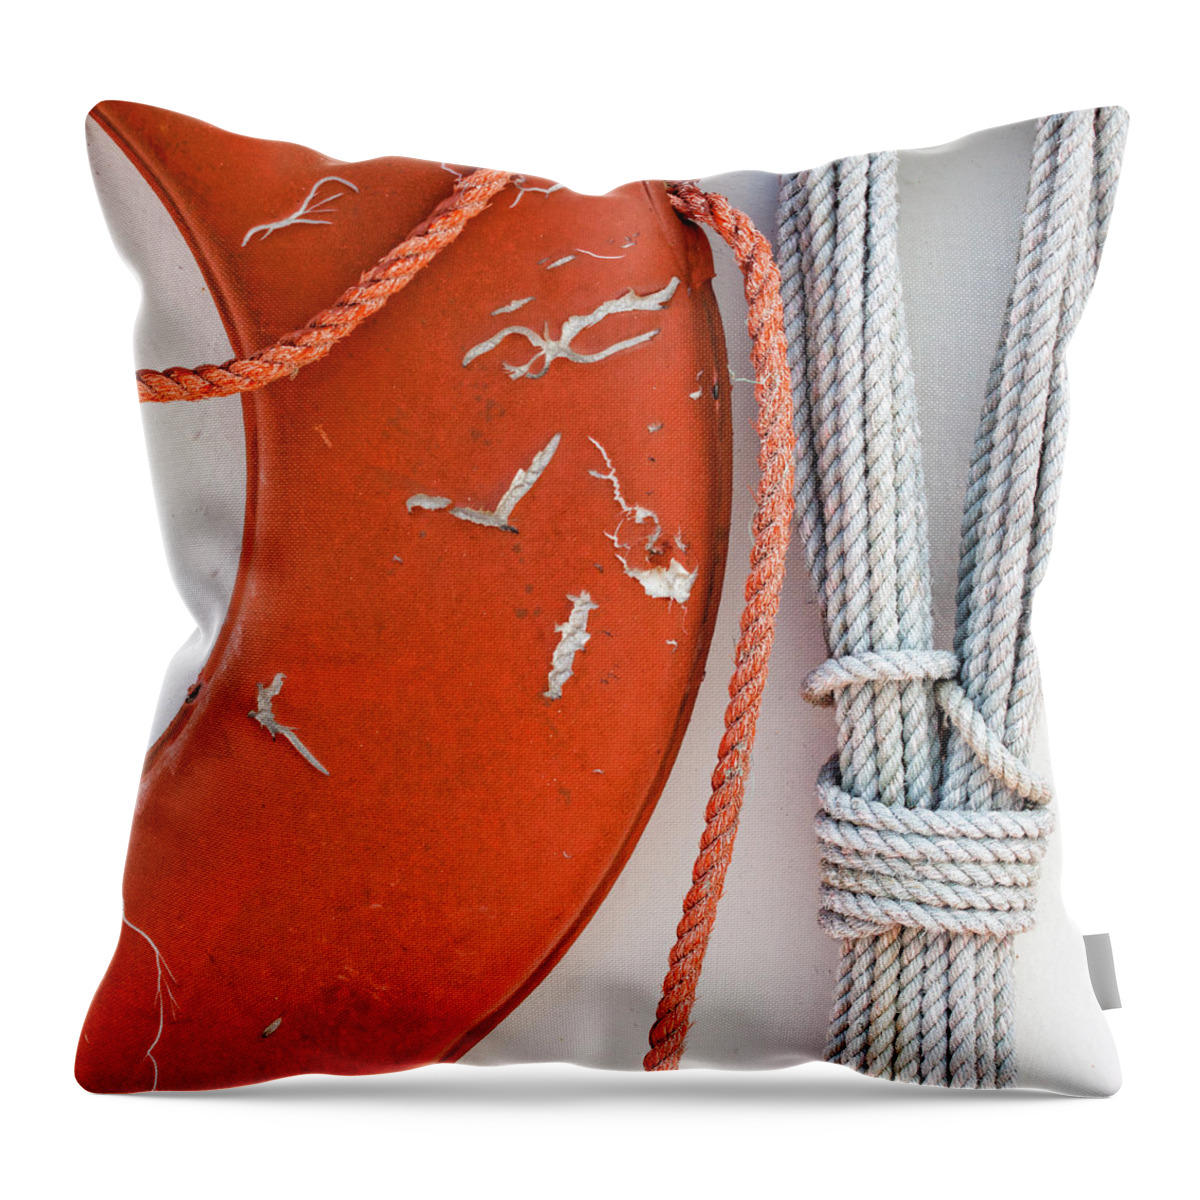 Boat Throw Pillow featuring the photograph Orange Life Ring by Carol Leigh